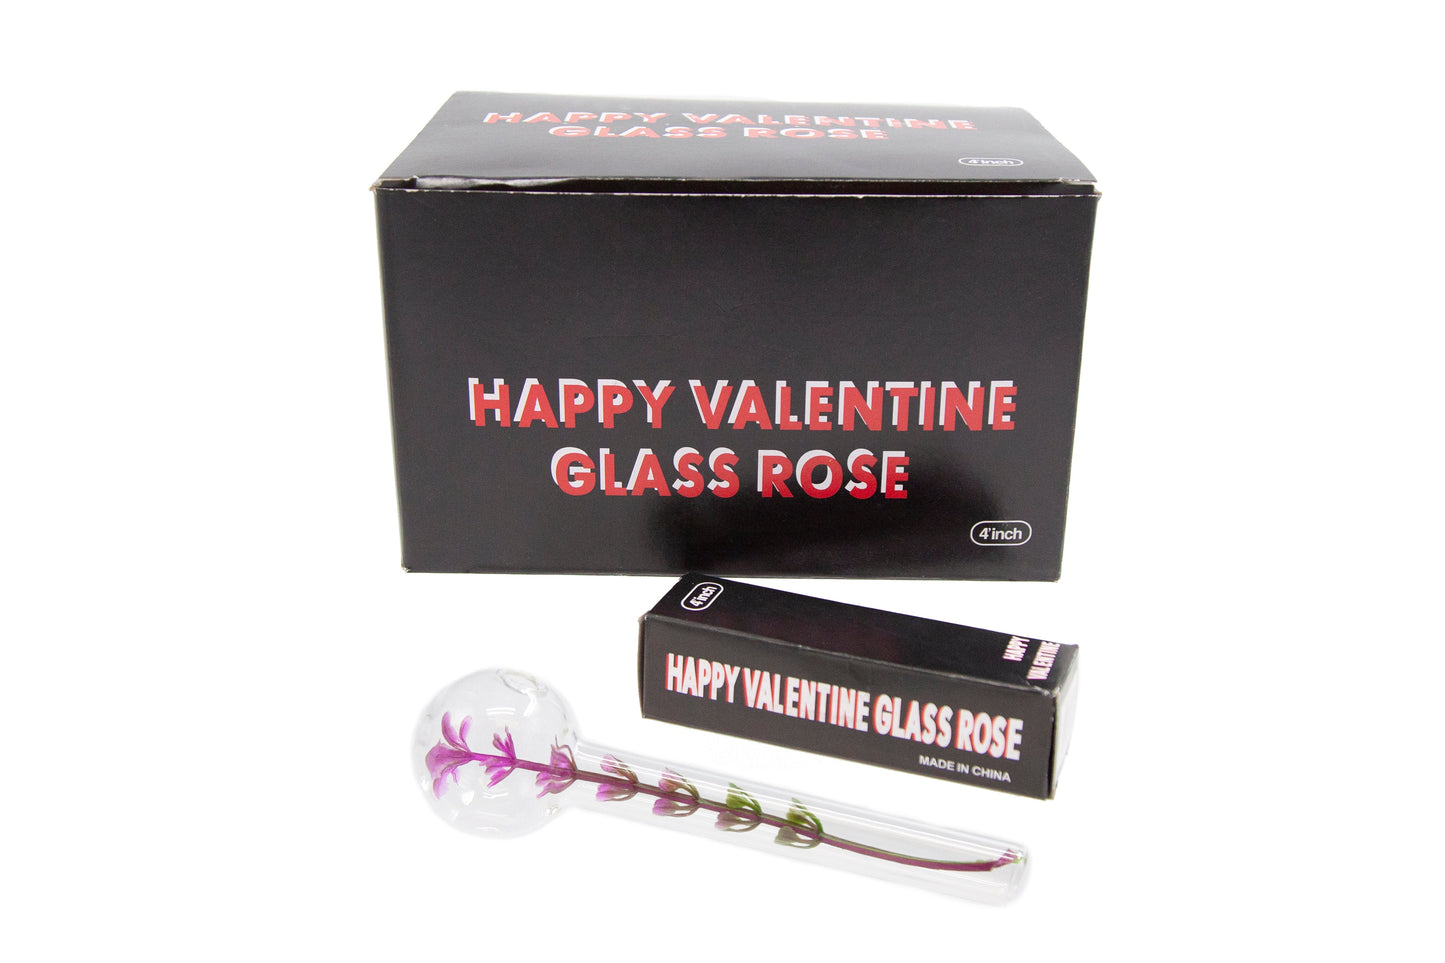 Happy Valentine Glass Rose - 8inch Ace Trading Canada